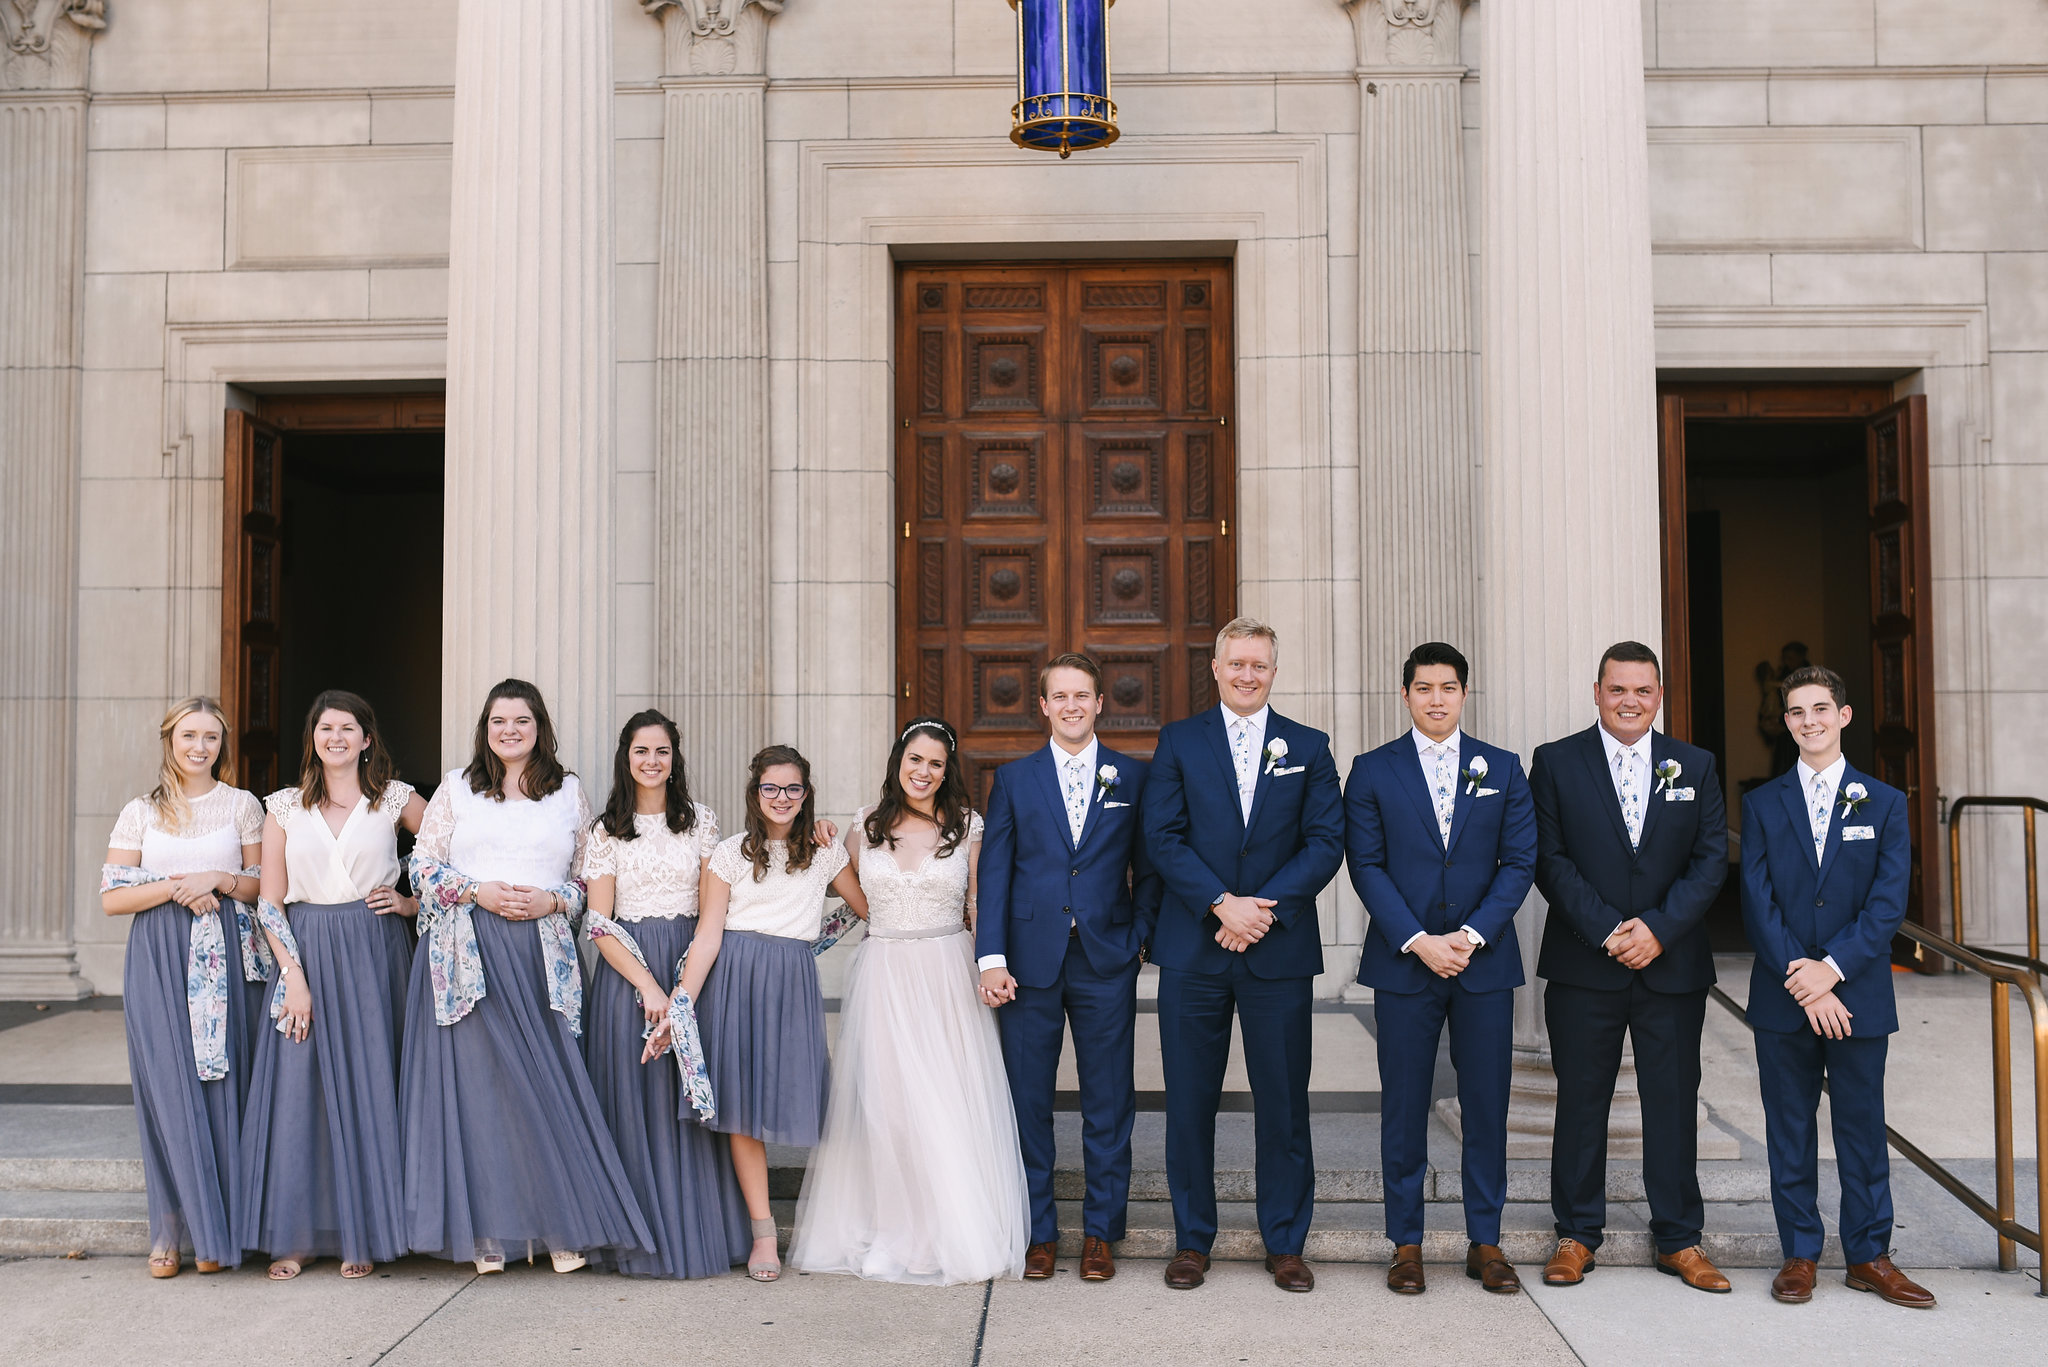  Baltimore, Canton, Church Wedding, Modern, Outdoors, Maryland Wedding Photographer, Romantic, Classic, St. Casimir Church, Portrait of wedding party, Blue groomsmen suits, white and gray bridesmaid dresses 